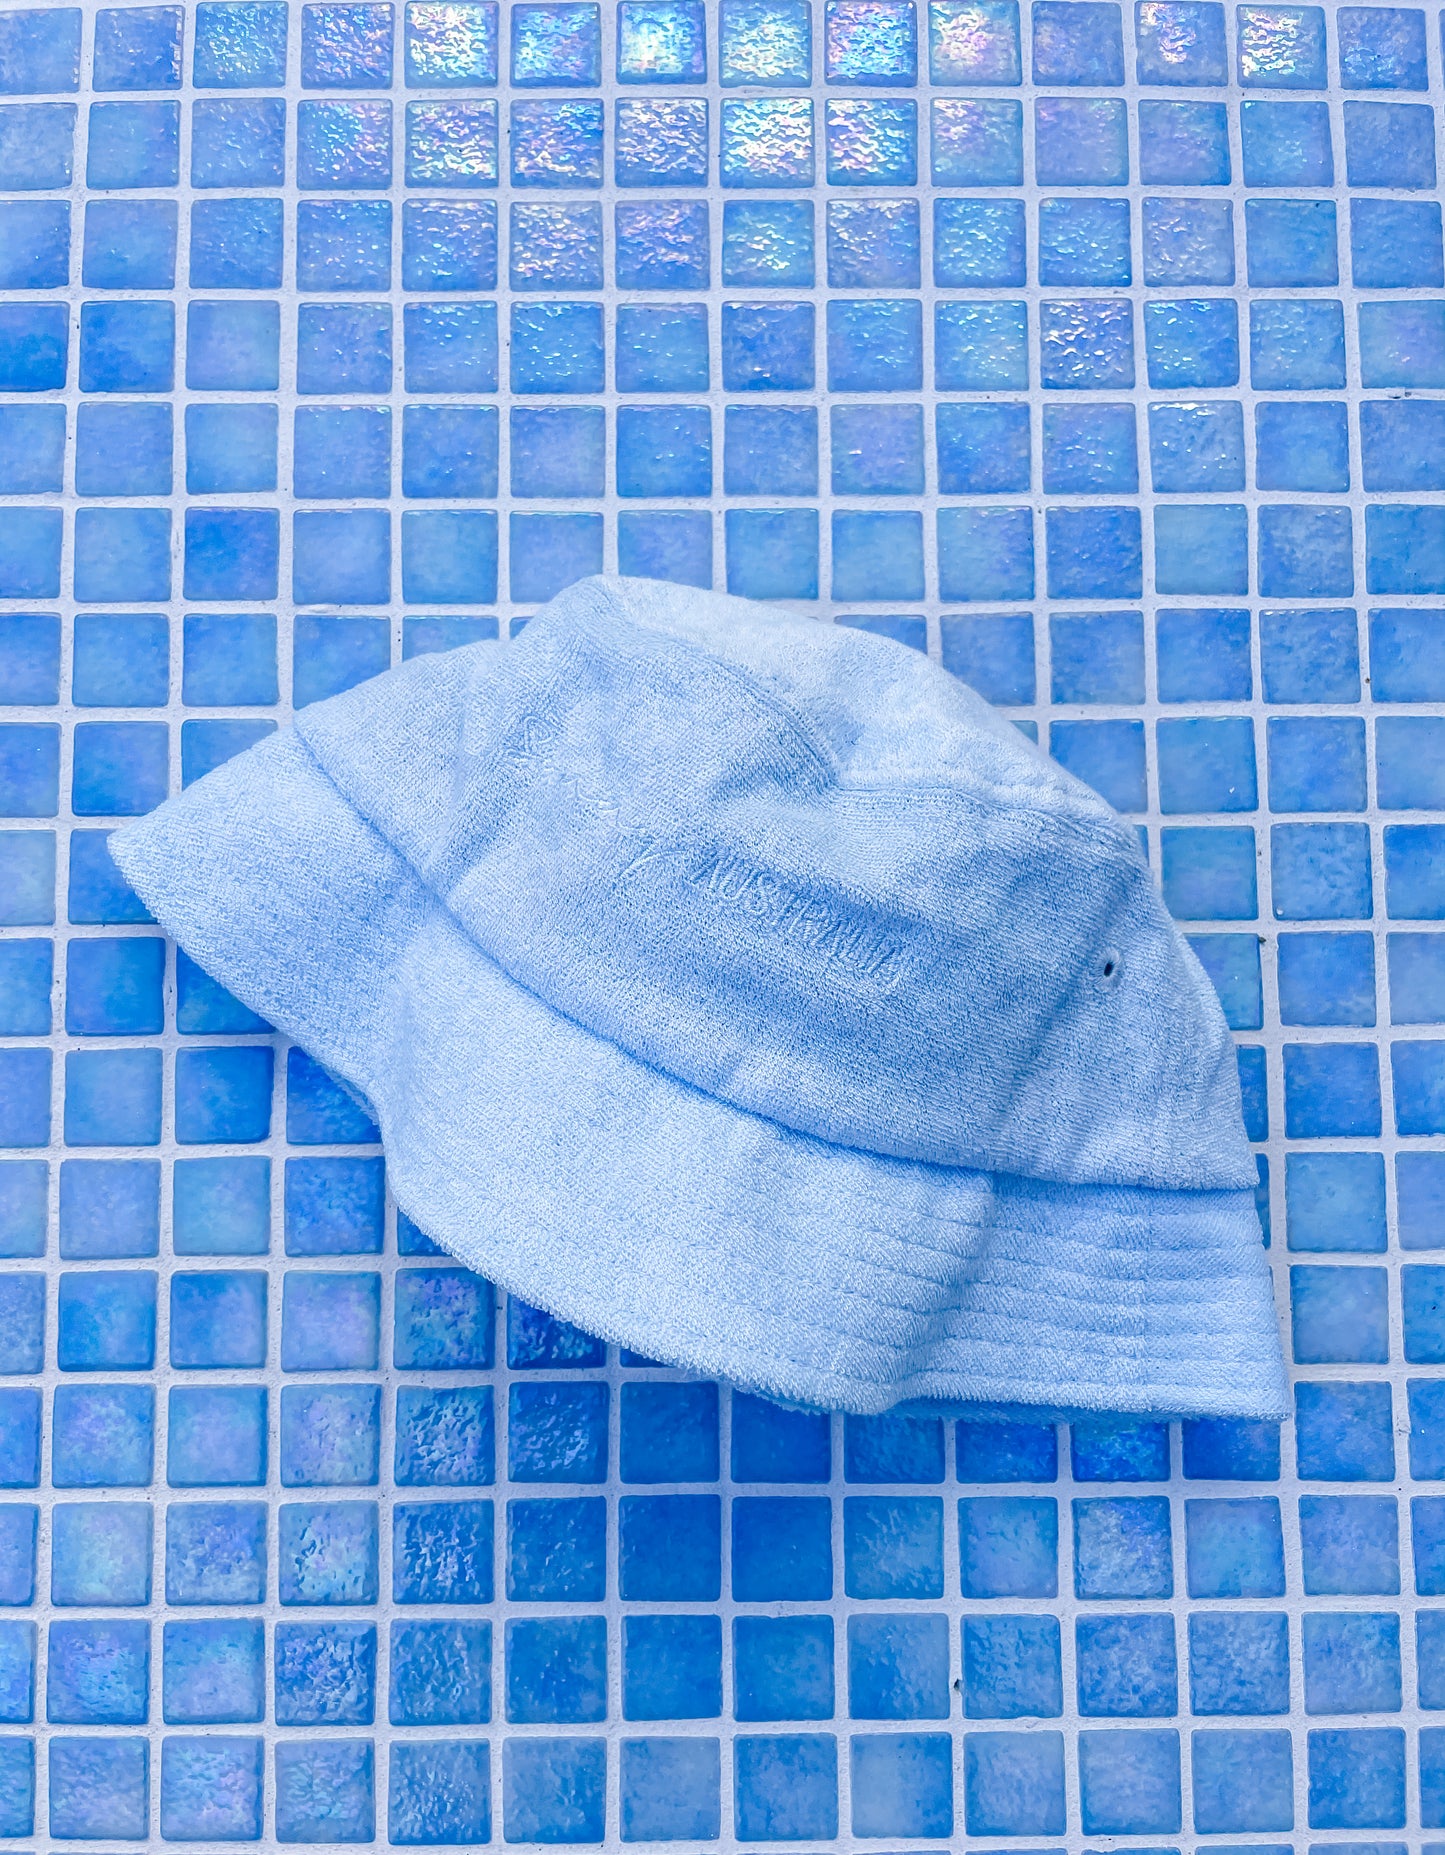 Blue Terry Towelling Bucket Hat